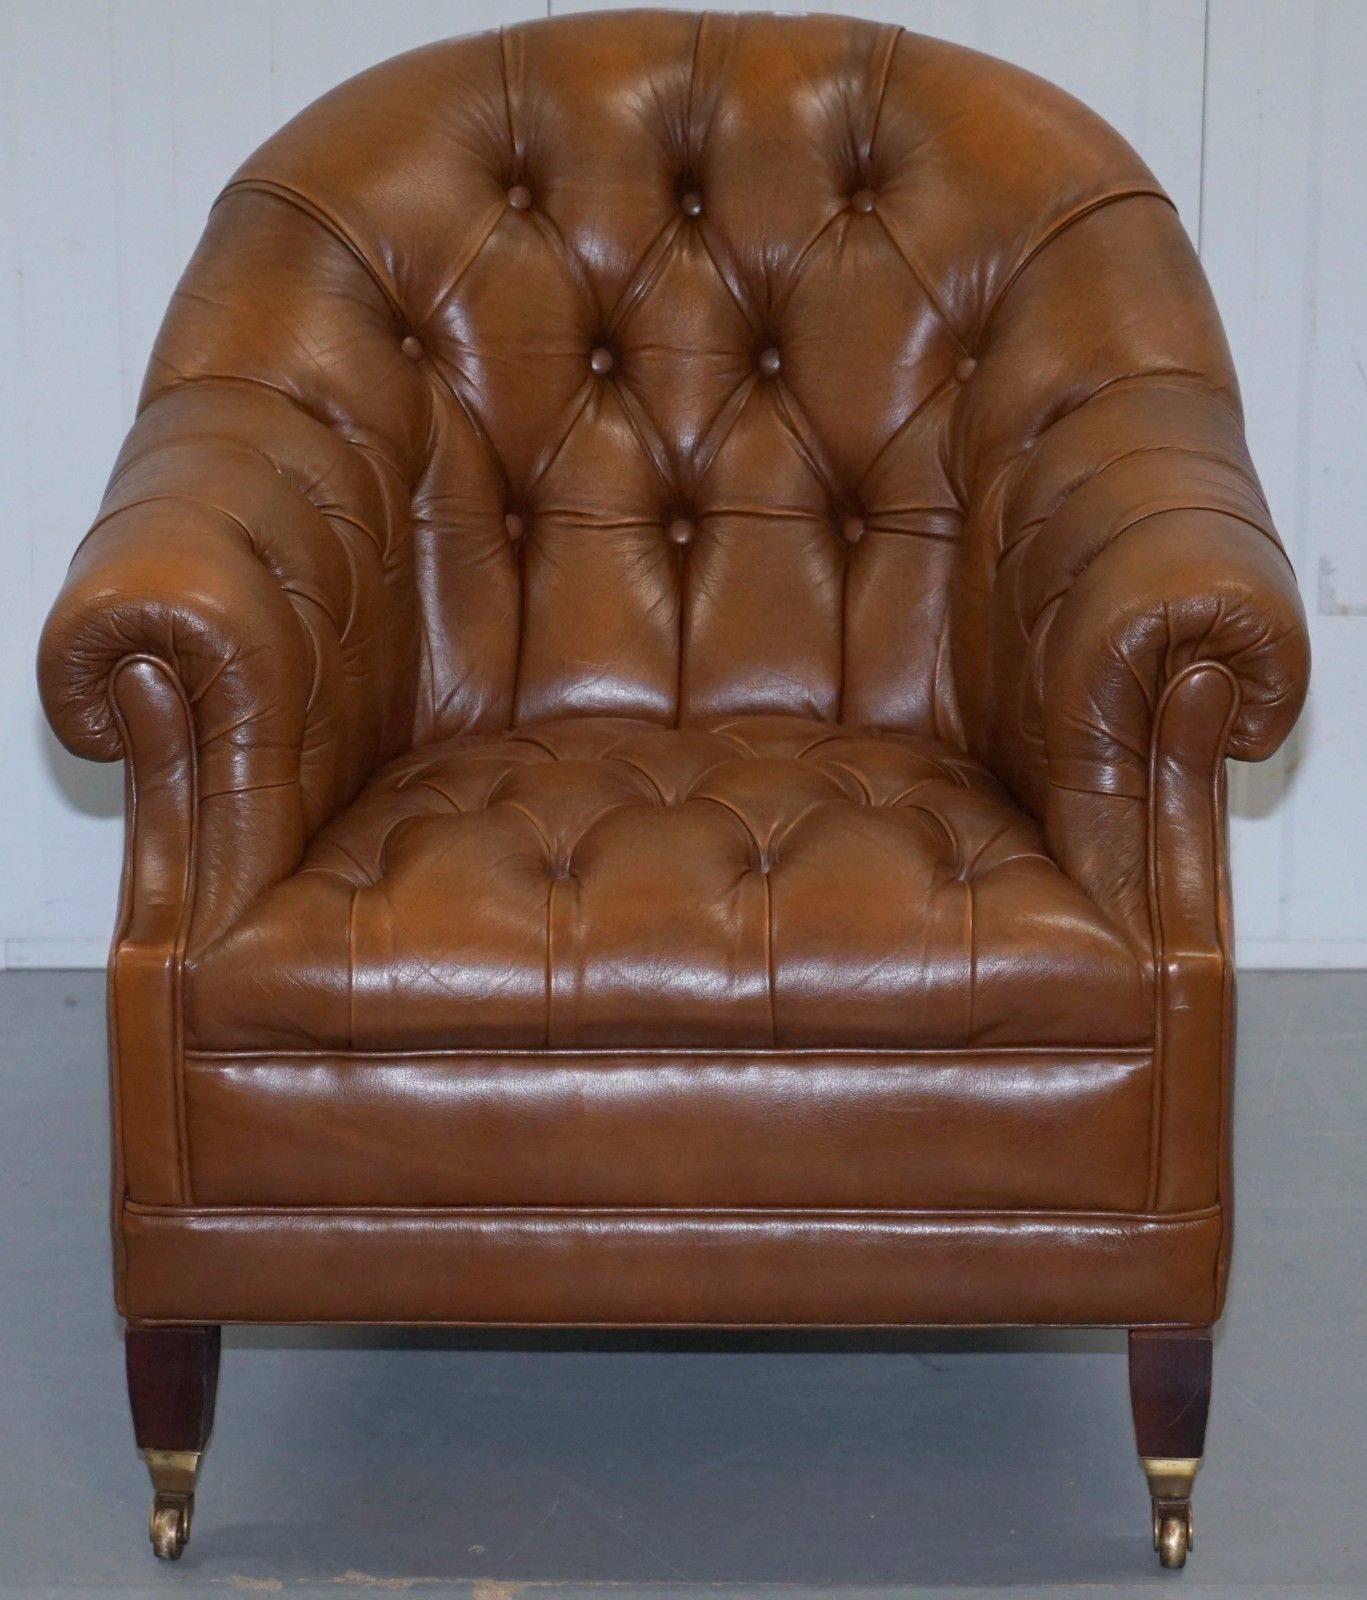 We are delighted to offer for sale this stunning aged brown leather Chesterfield club armchair with solid wood tapered legs and brass castors

A very nice well-made piece in vintage period condition, I had planned to have it hand dyed a lovely